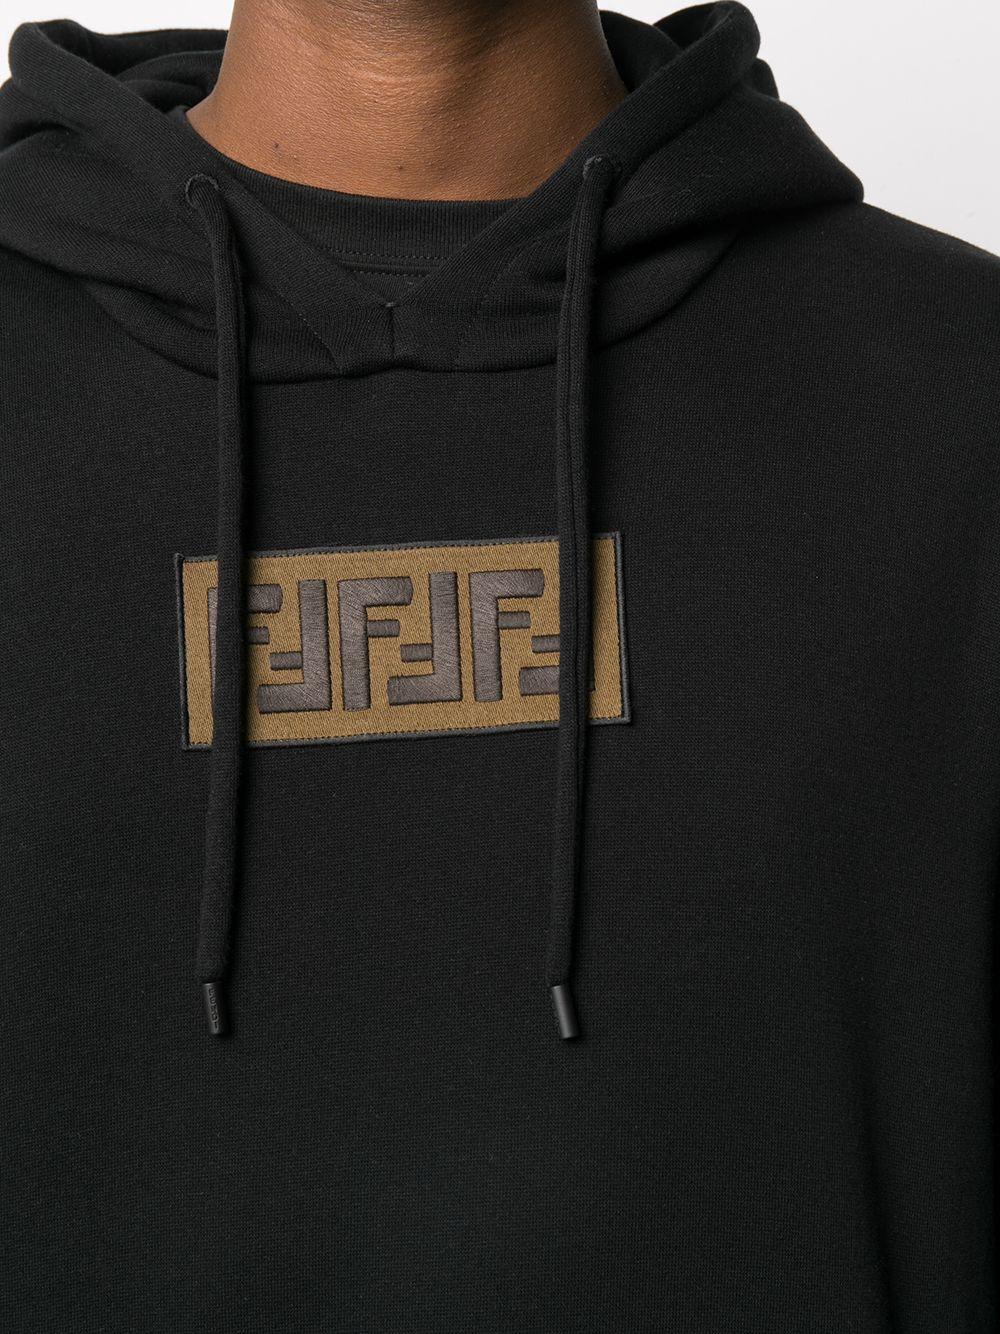 Fendi Cotton Embroidered Ff Logo Hoodie in Black for Men - Save 4 